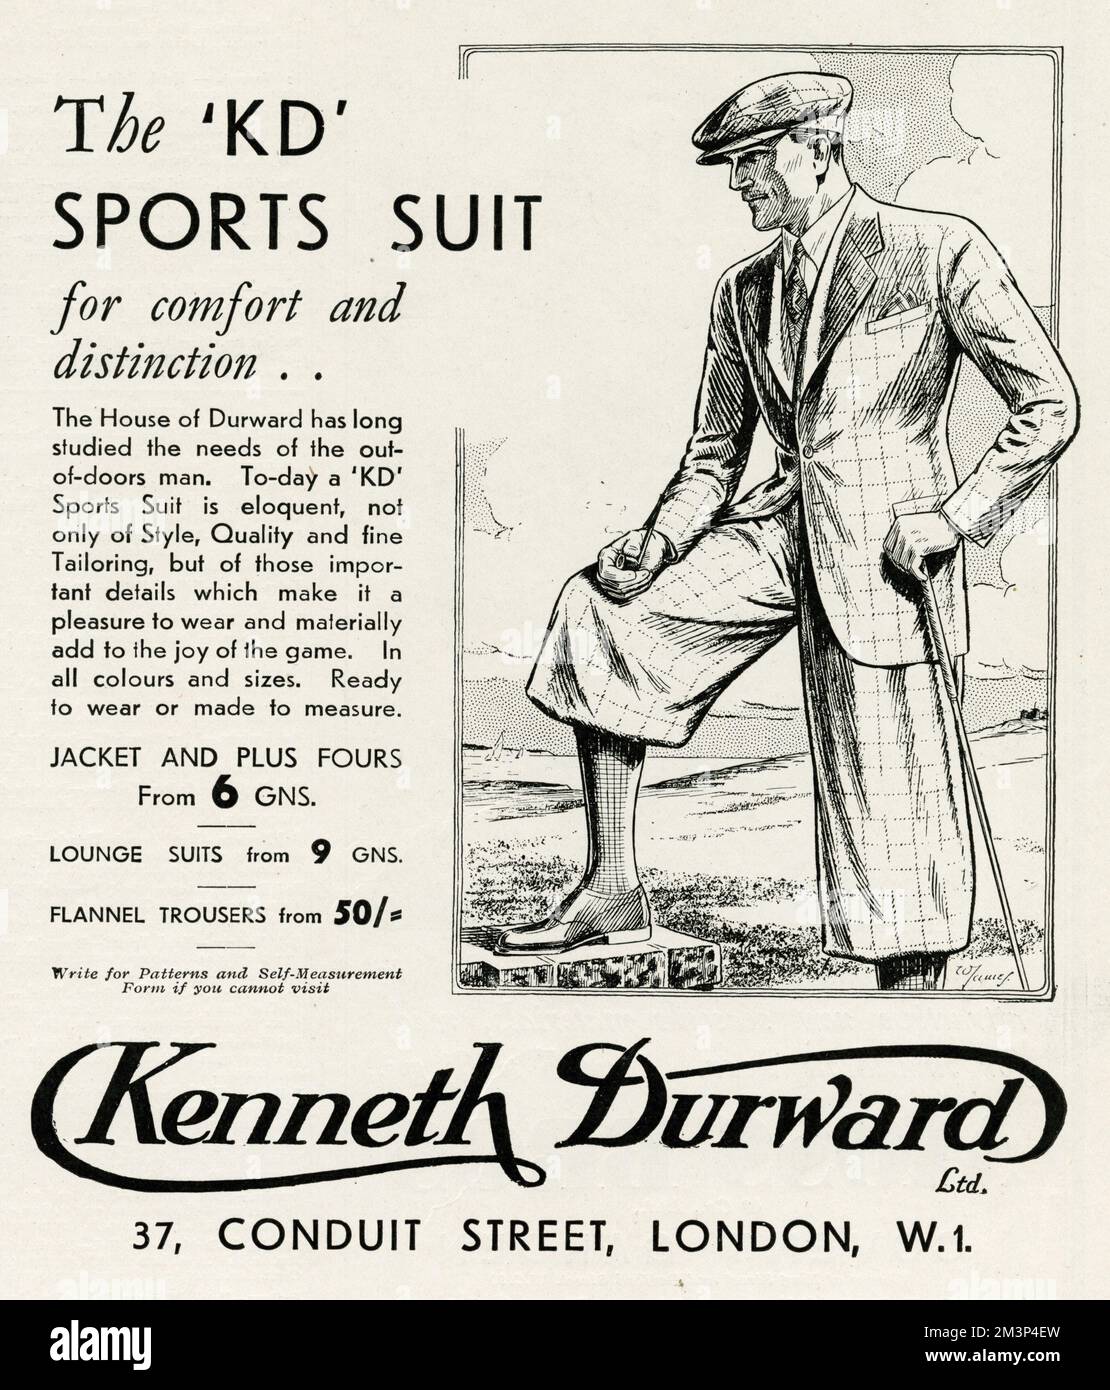 'The KD sports suit for comfort and distinction' . . The house of Durward has long studied the needs of the out-of doors man.  KD sports suit is eloquent, not only of style, quality and fine tailoring, but of those important details which make it a pleasure to wear and materially add to the joy of the game.  1934 Stock Photo